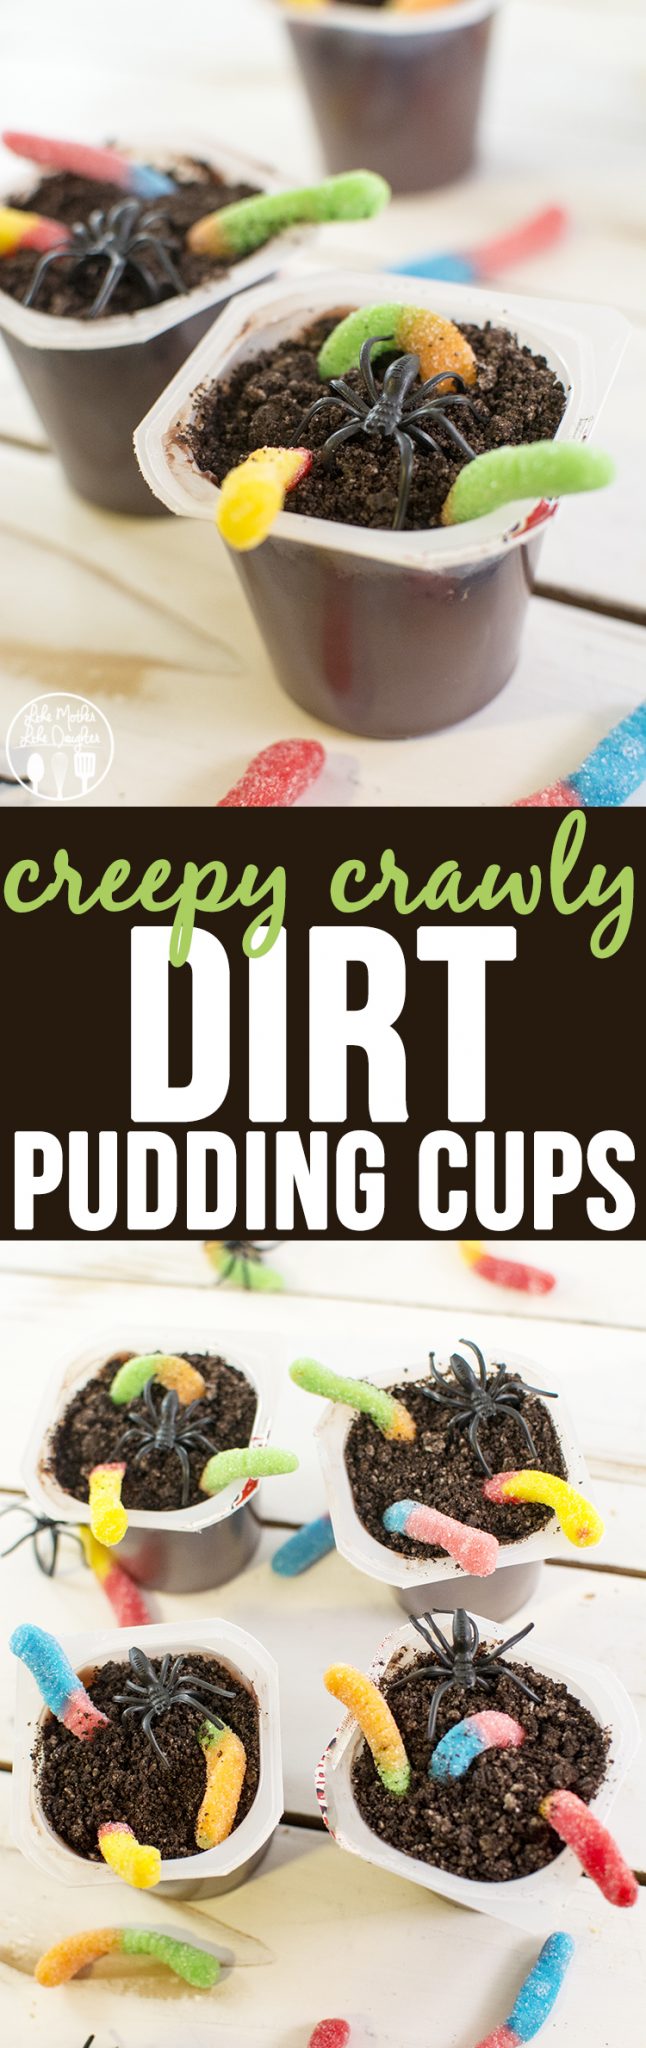 Creepy Crawly Dirt Pudding Cups - These 